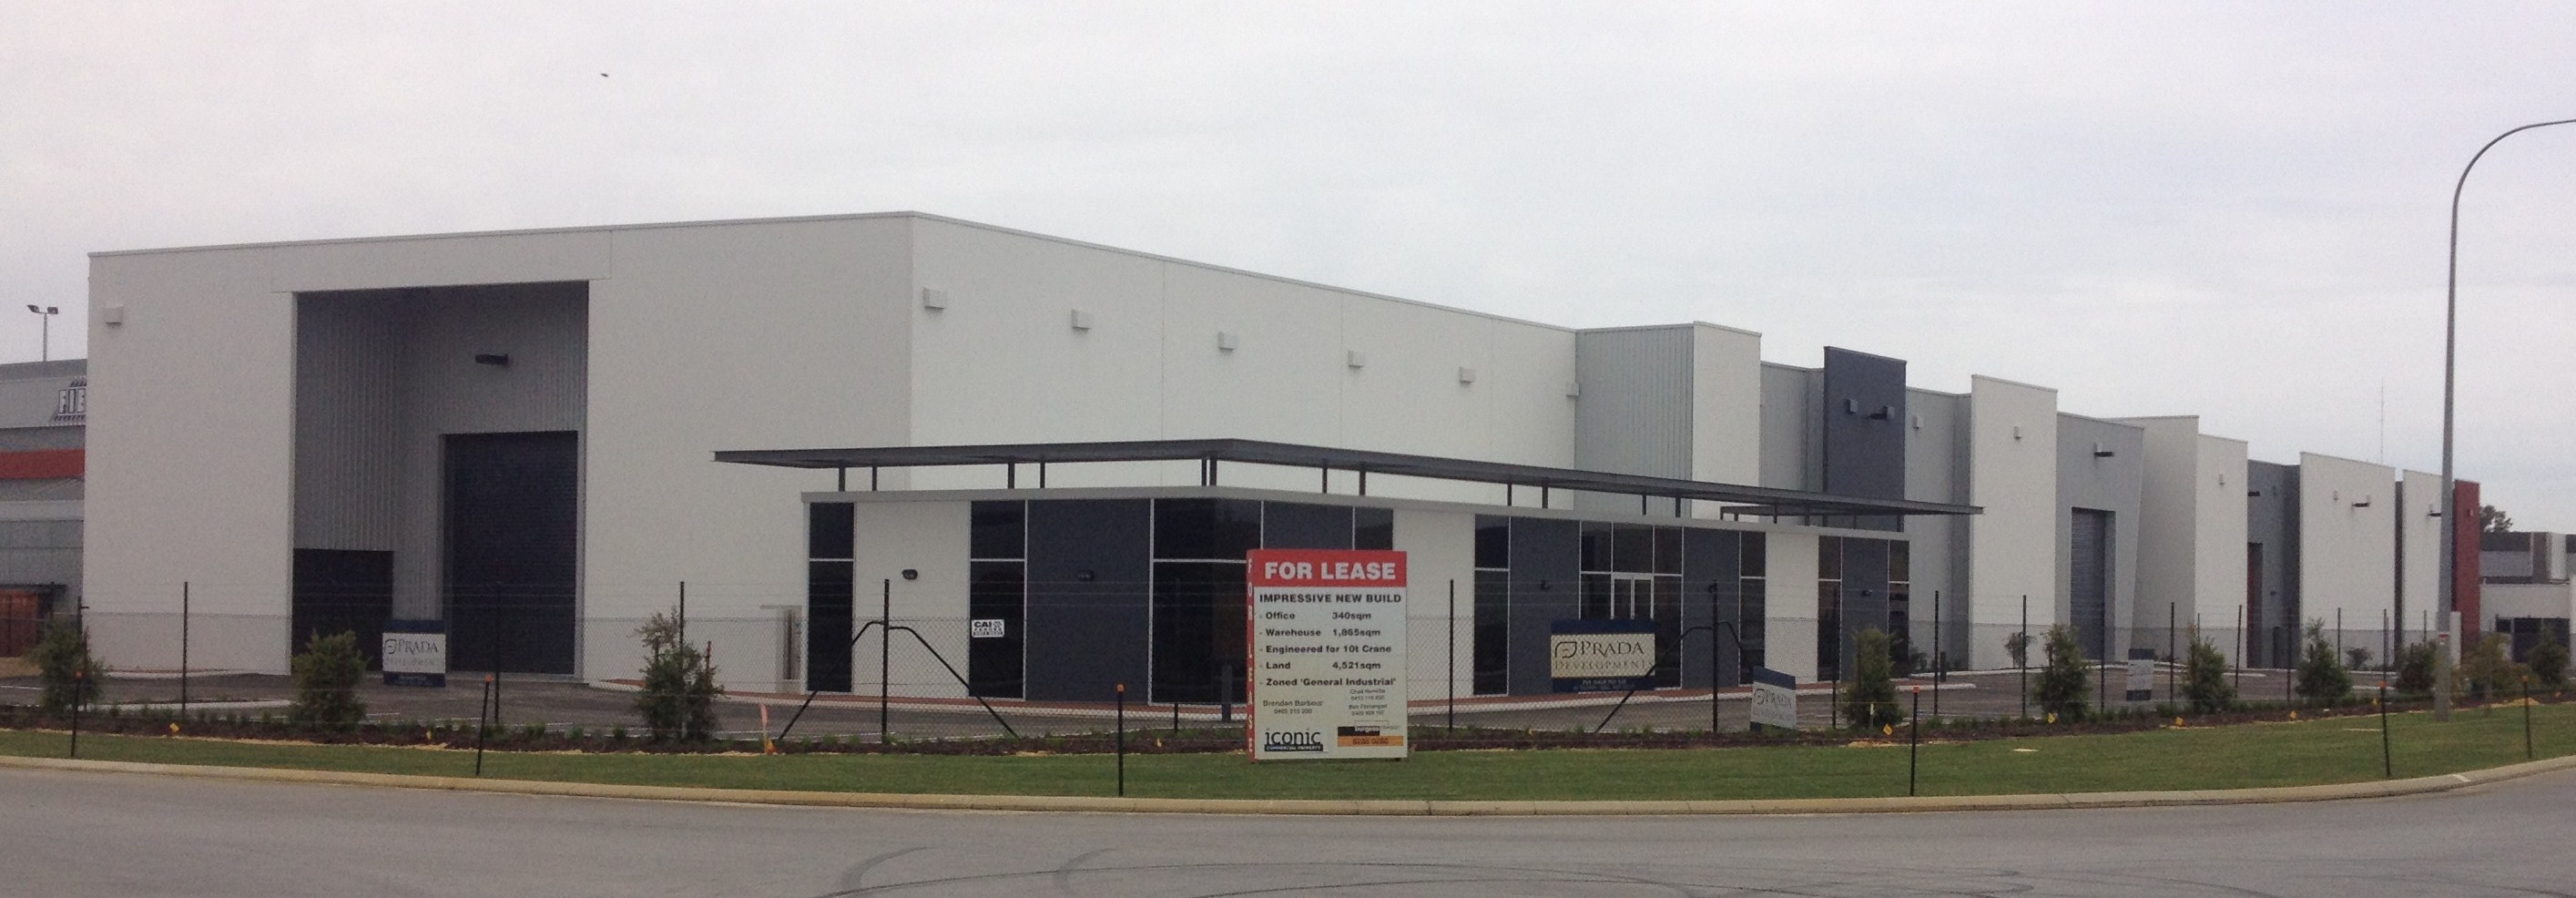 Exterior of commercial warehouse units, finished in tones of grey